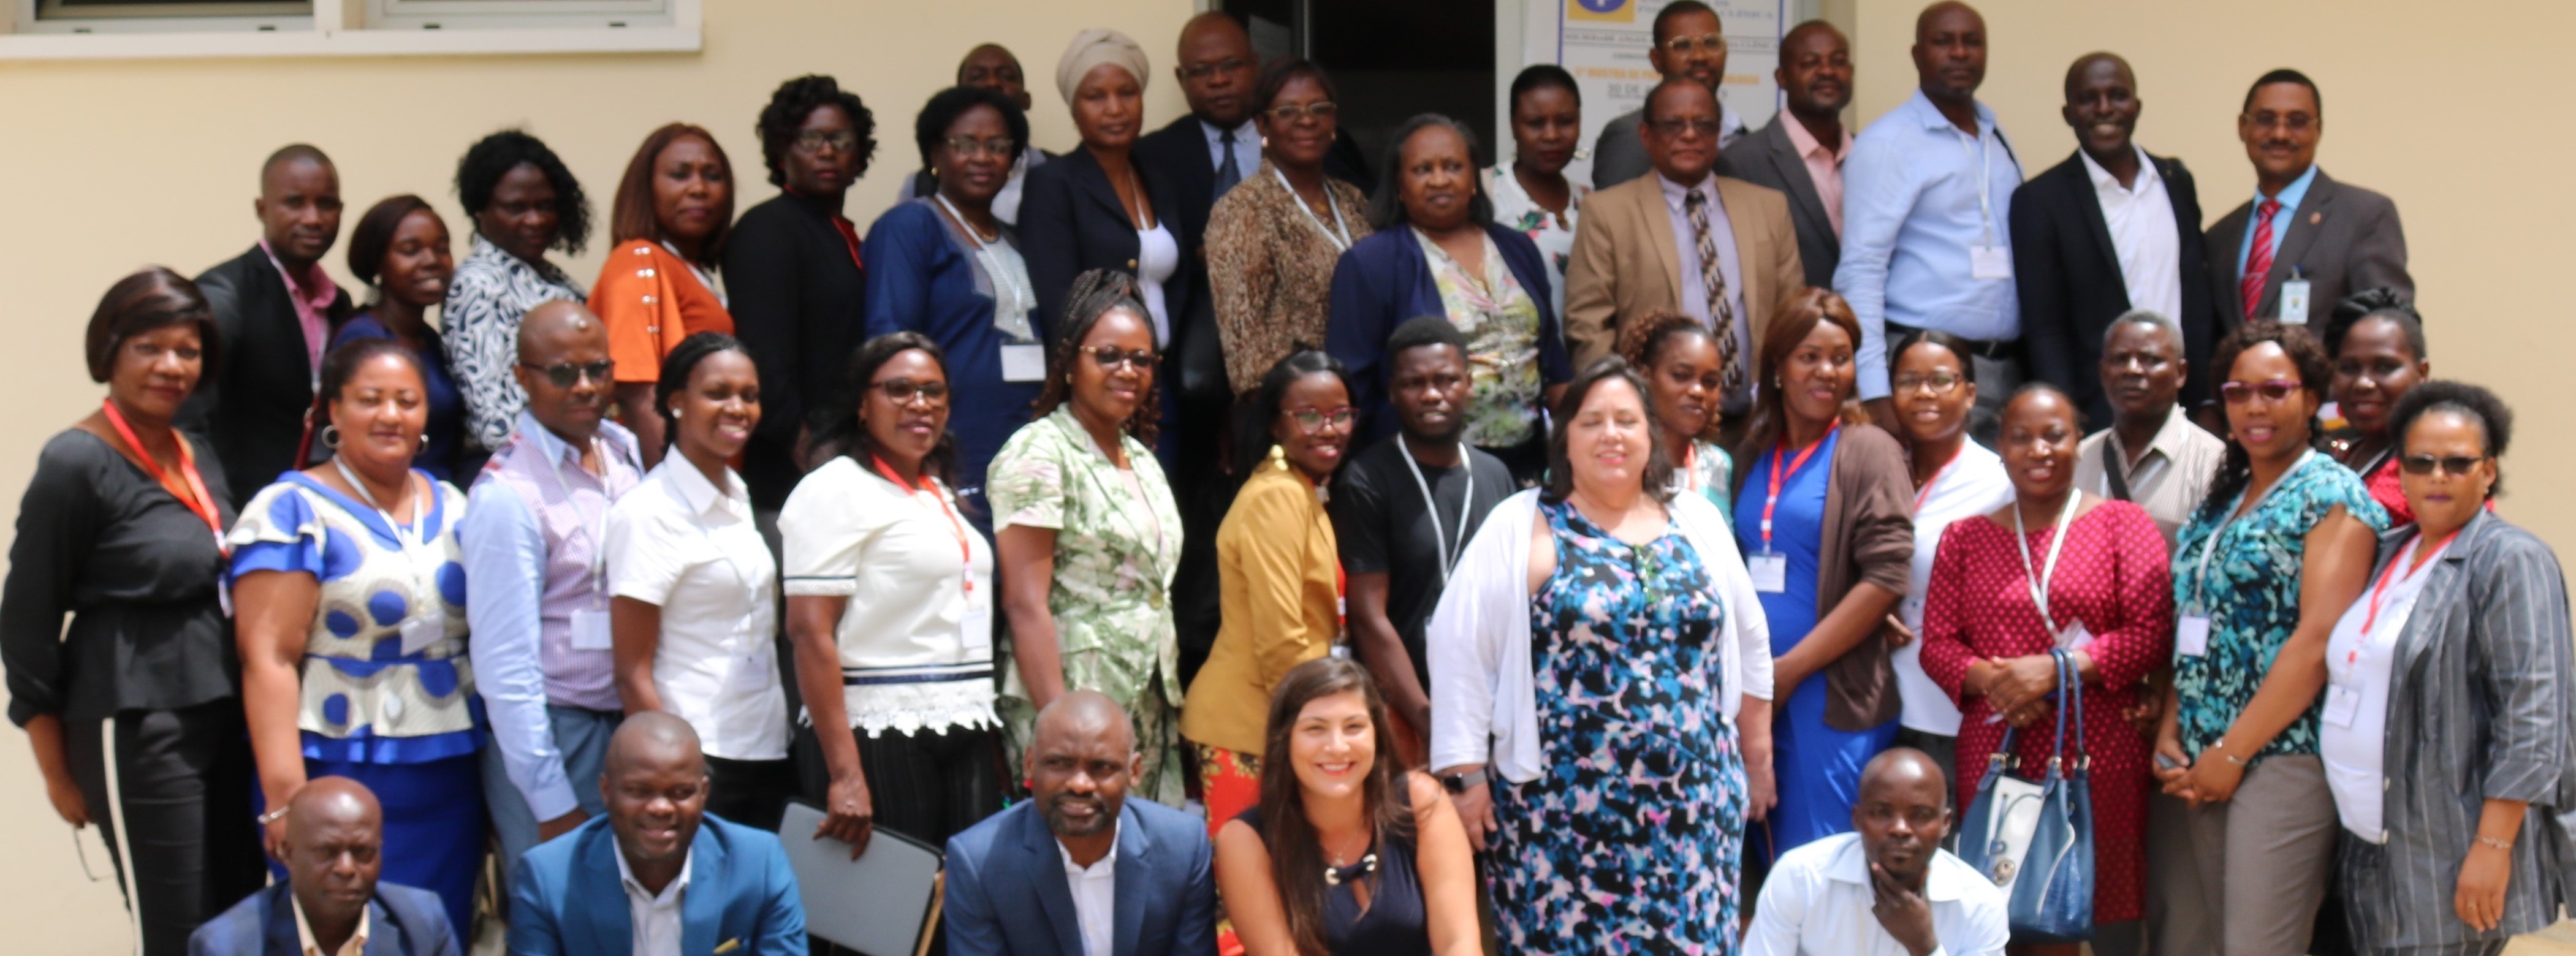 Participants at the course’s launch in April, 2019. Photo credit: Julia Perri/GHSC-PSM